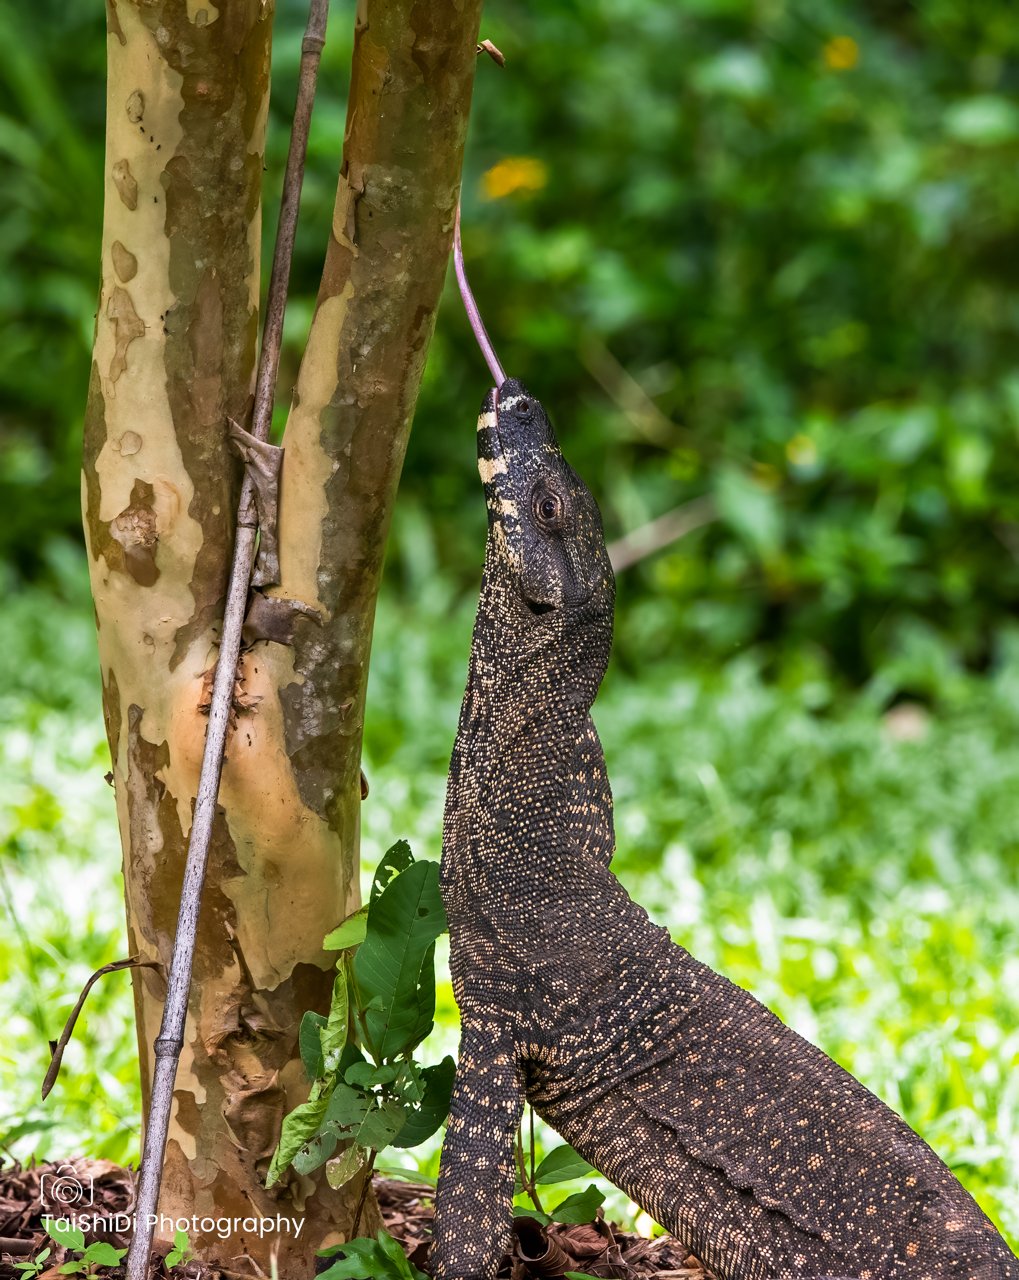 Goanna inspecting tree with stick insect above!